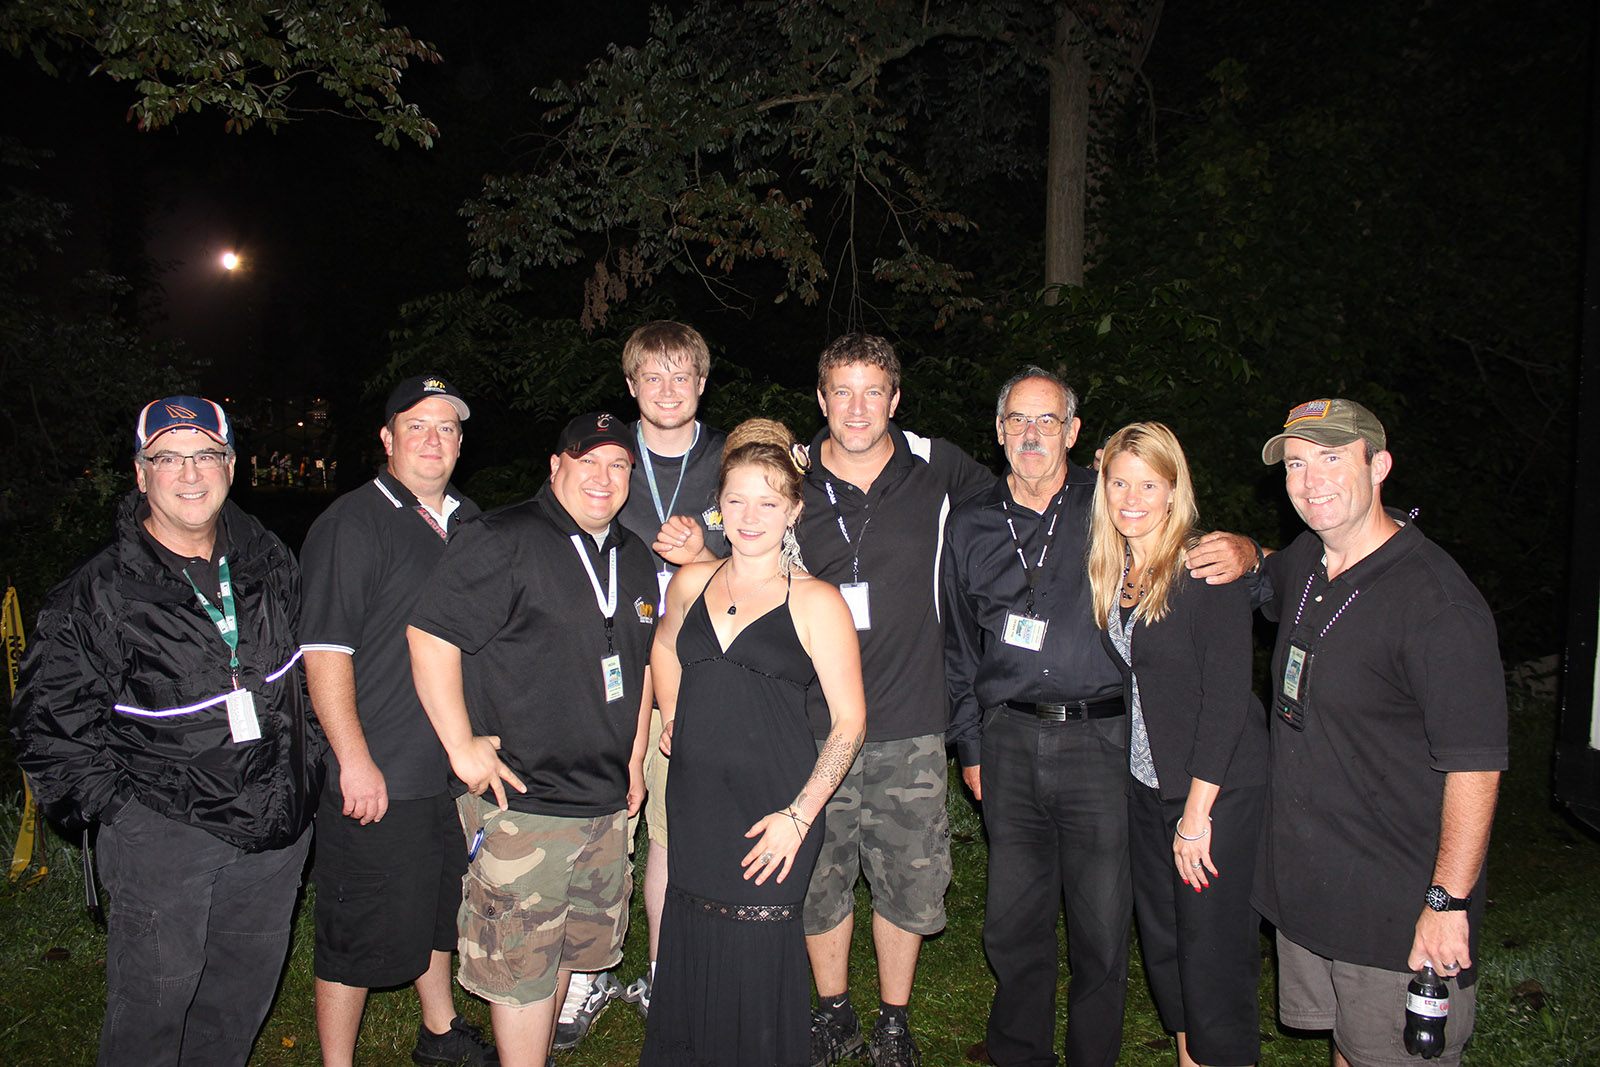 The production crew from the Crystal Bowersox show at The Lancaster Festival.